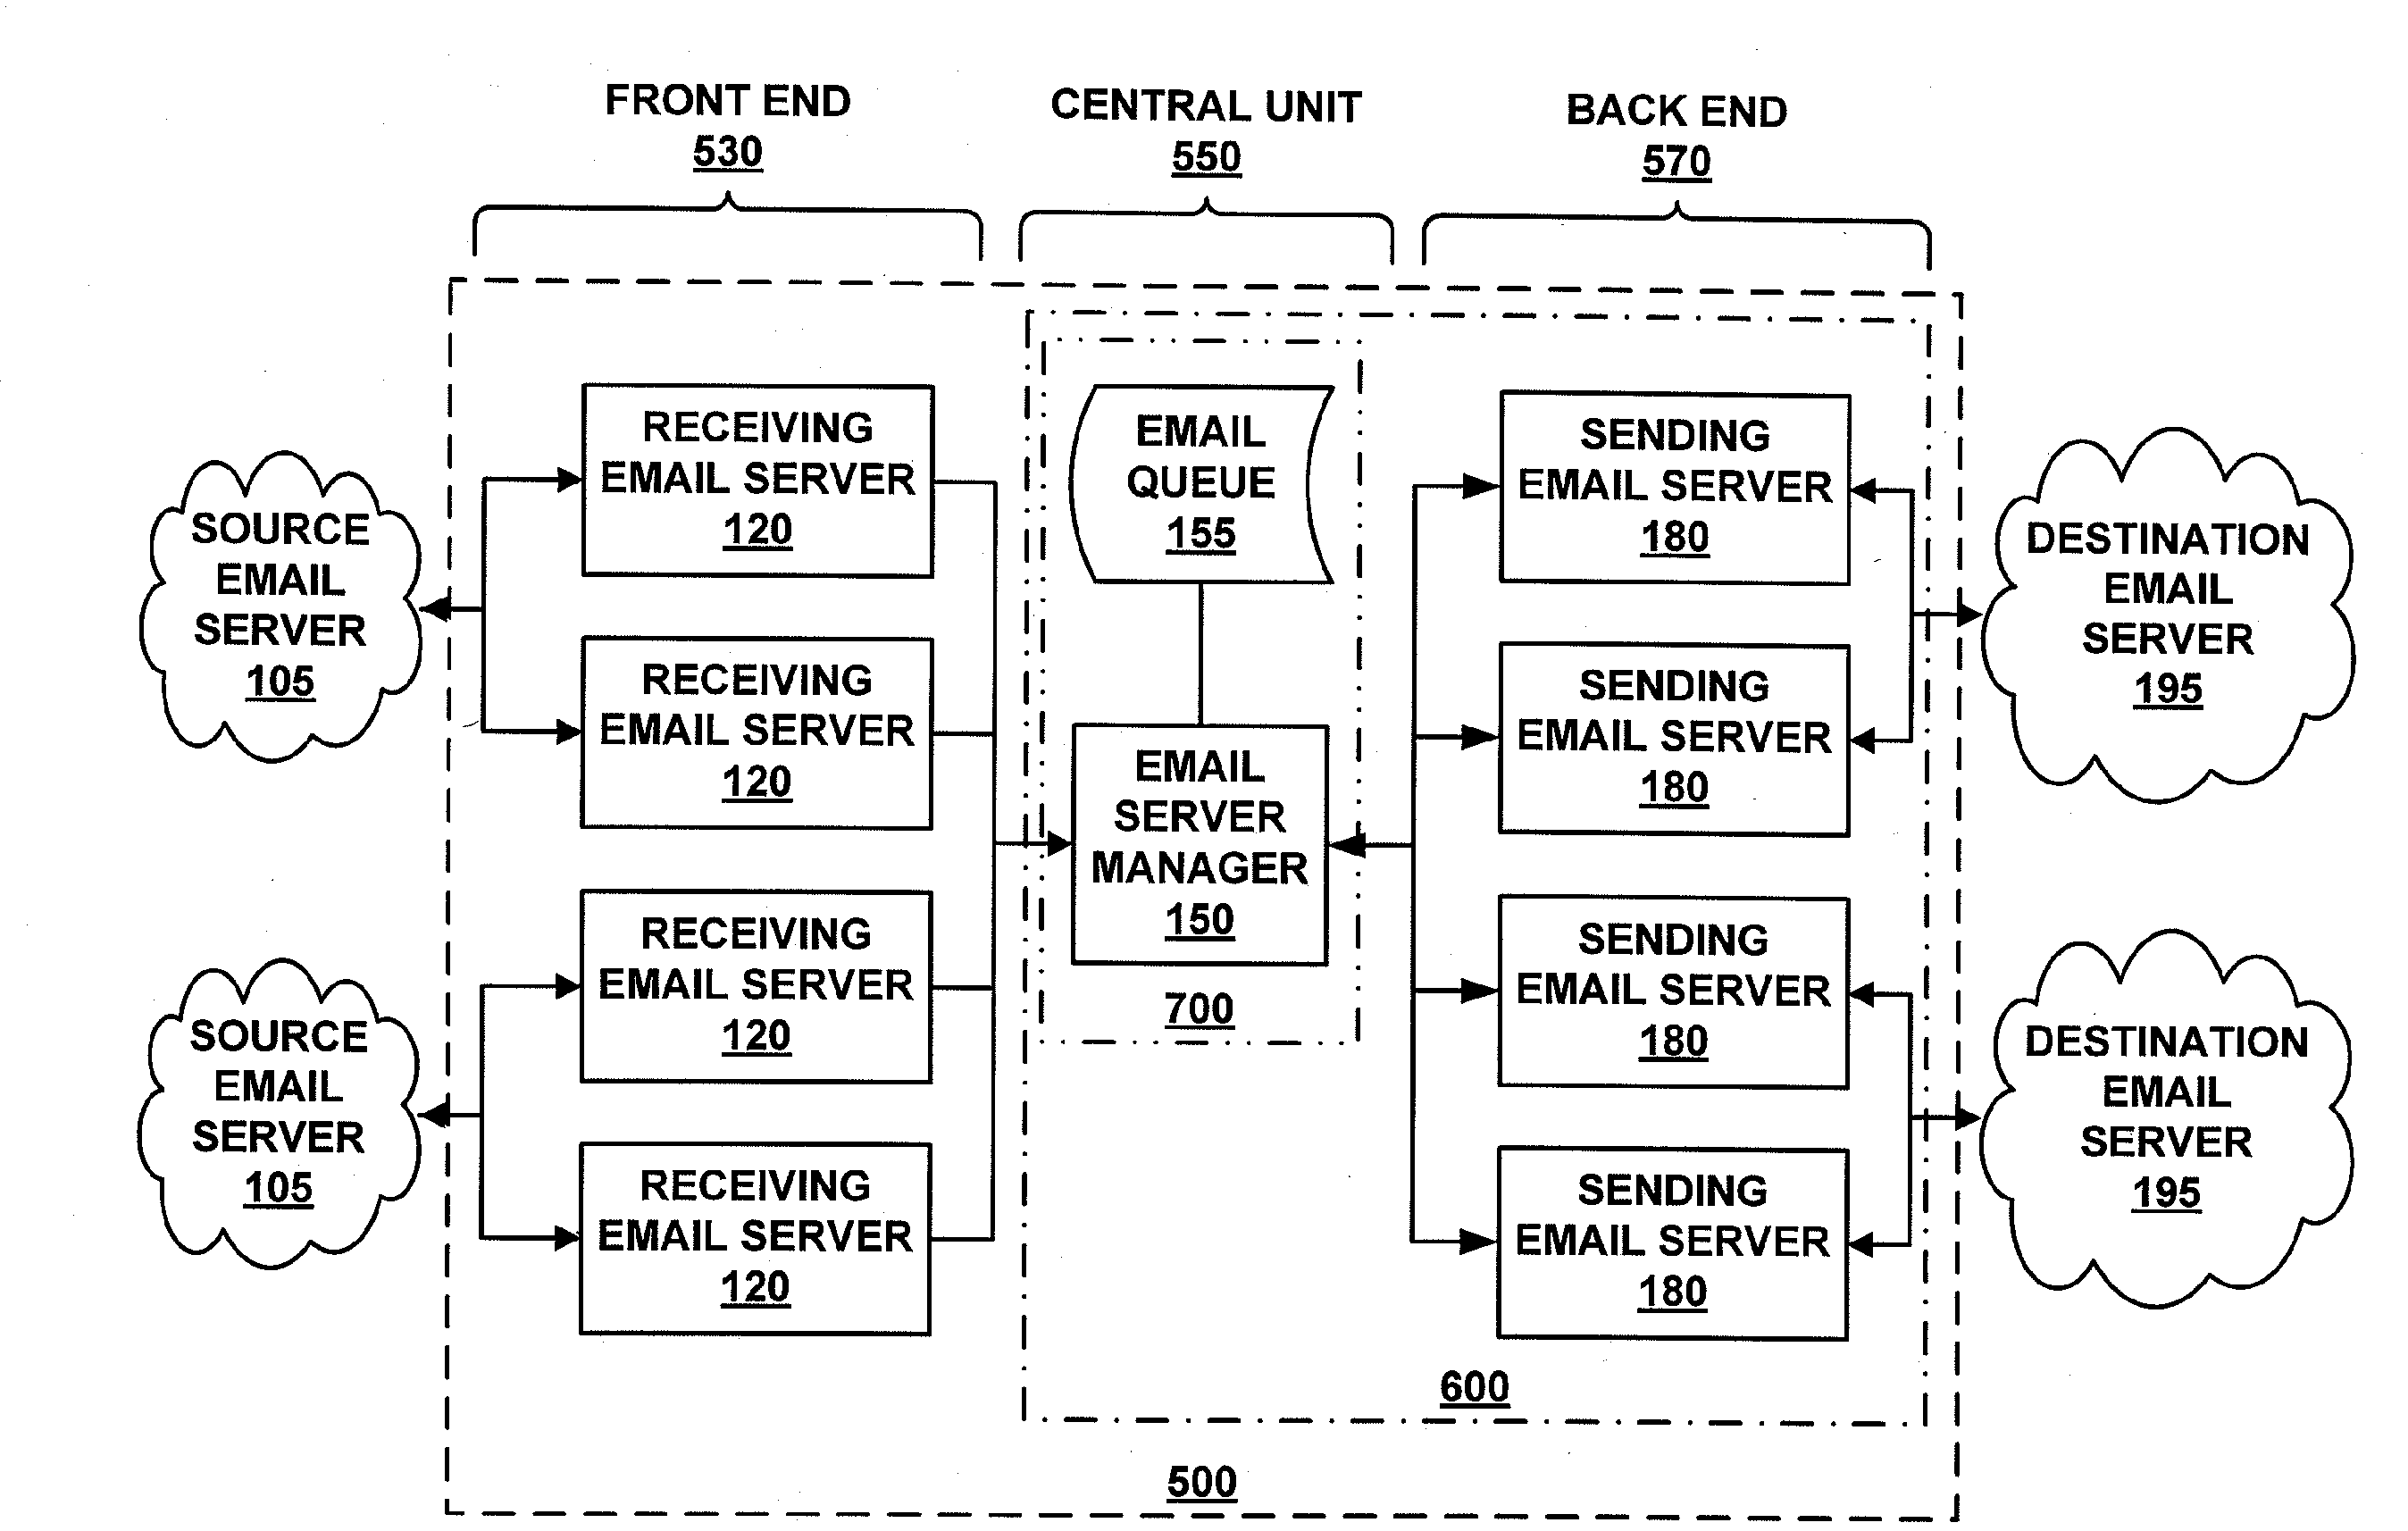 Intelligent electronic mail server manager, and system and method for coordinating operation of multiple electronic mail servers